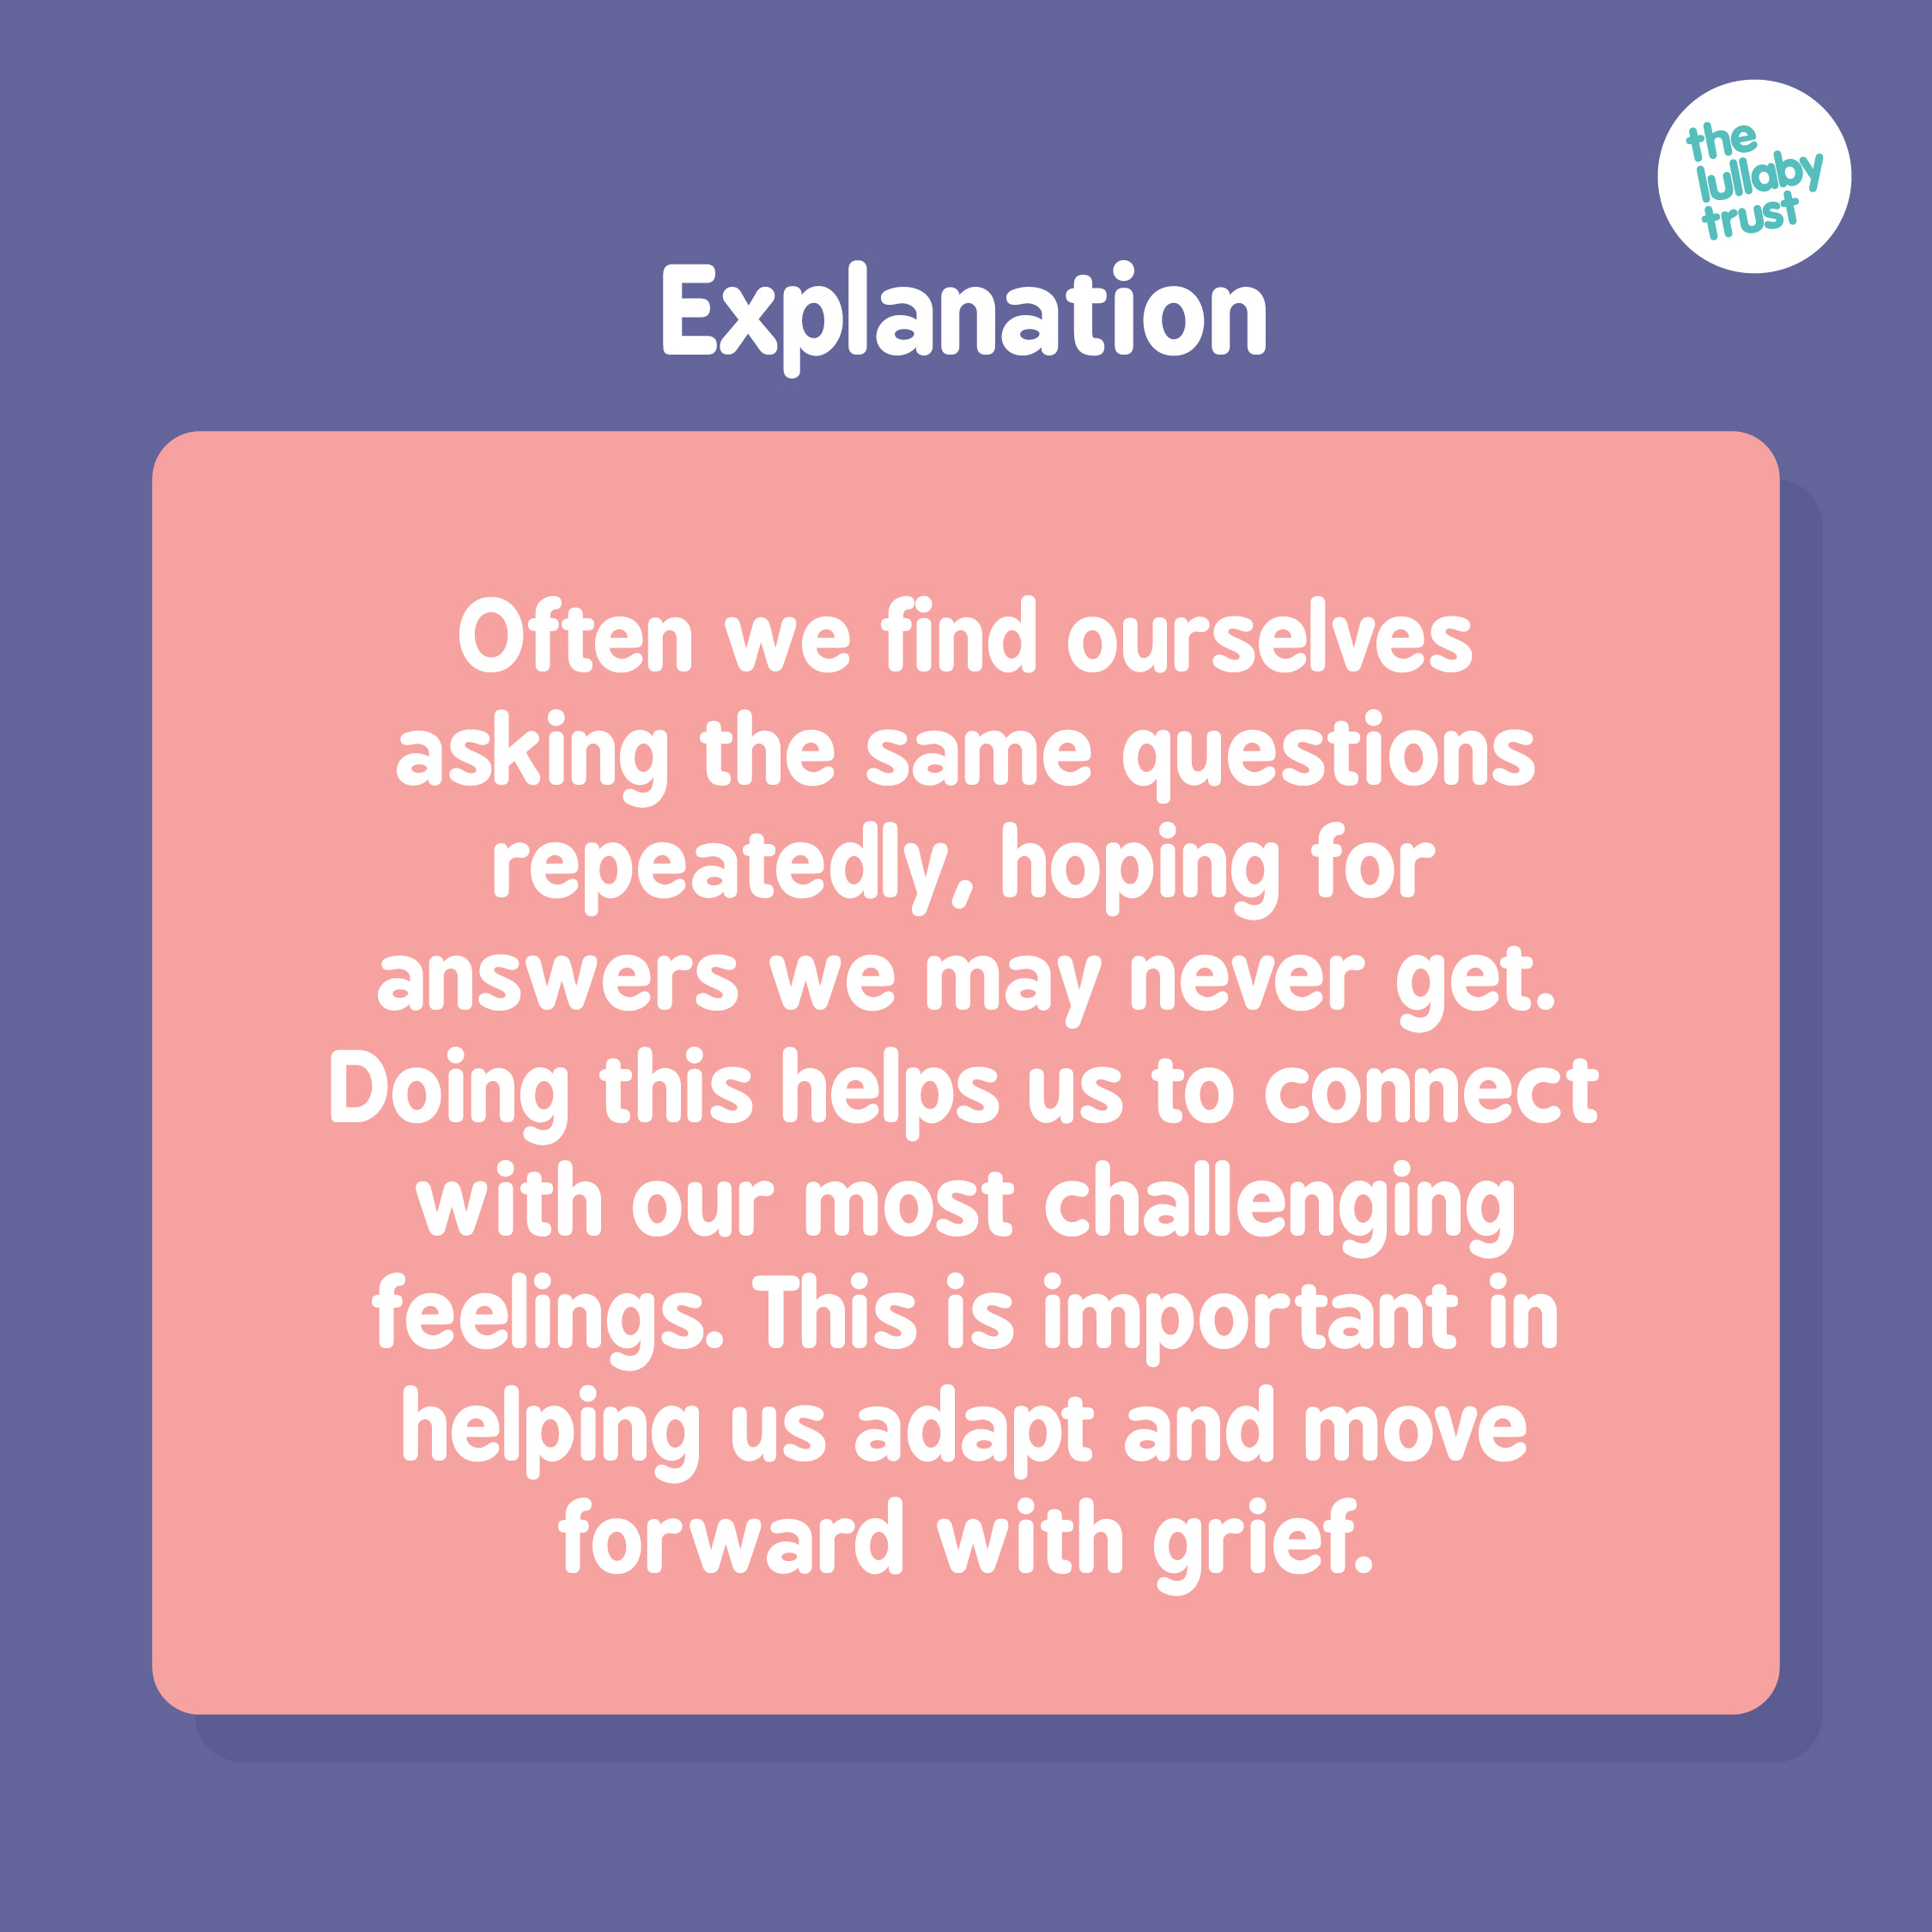 Explanation: Often we find ourselves asking the same questions repeatedly, hoping for answers we may never get. Doing this helps us to connect with our most challenging feelings. This is important in helping us adapt and move forward with grief